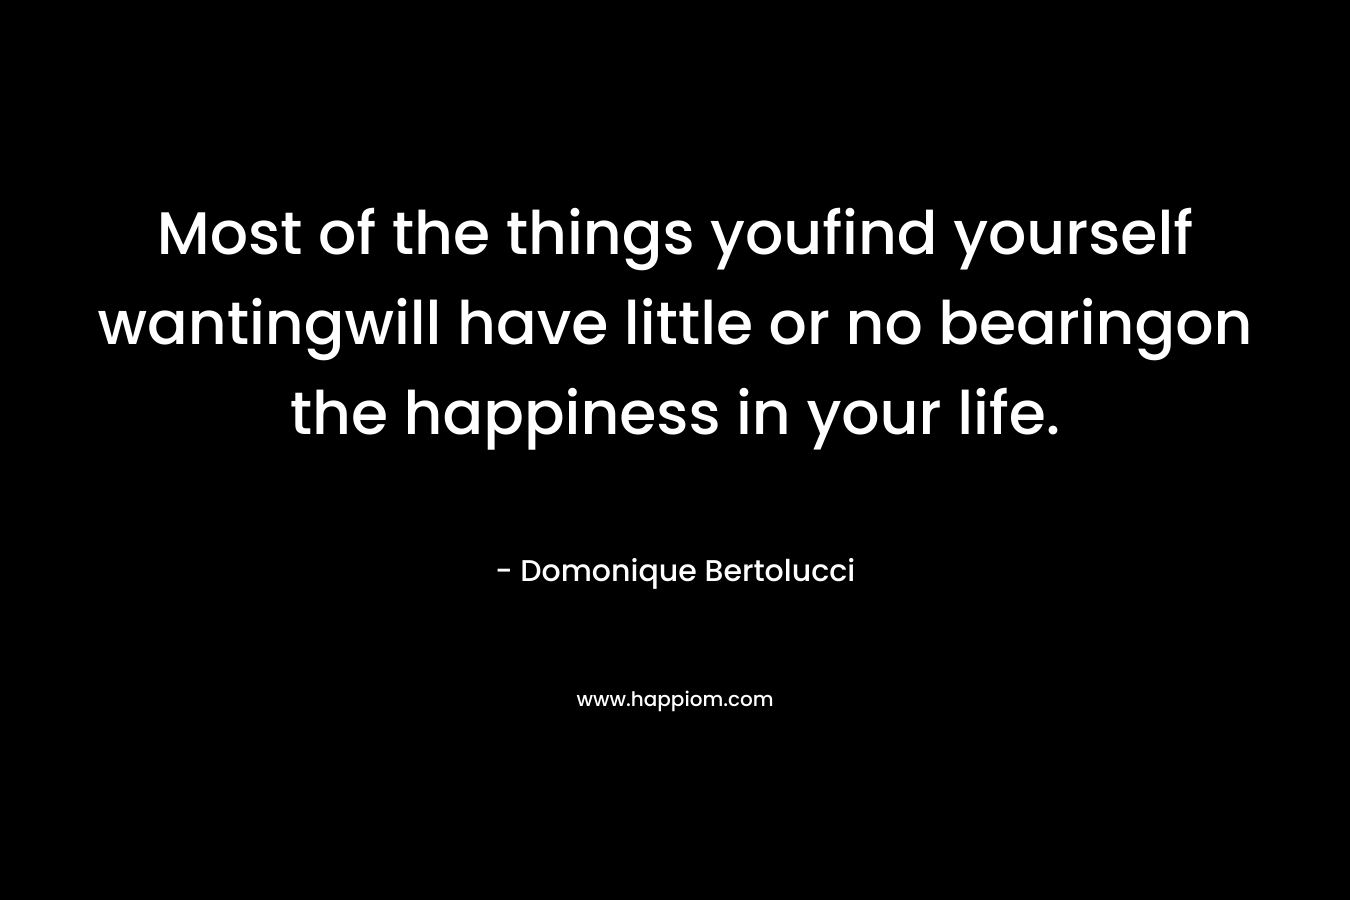 Most of the things youfind yourself wantingwill have little or no bearingon the happiness in your life. – Domonique Bertolucci